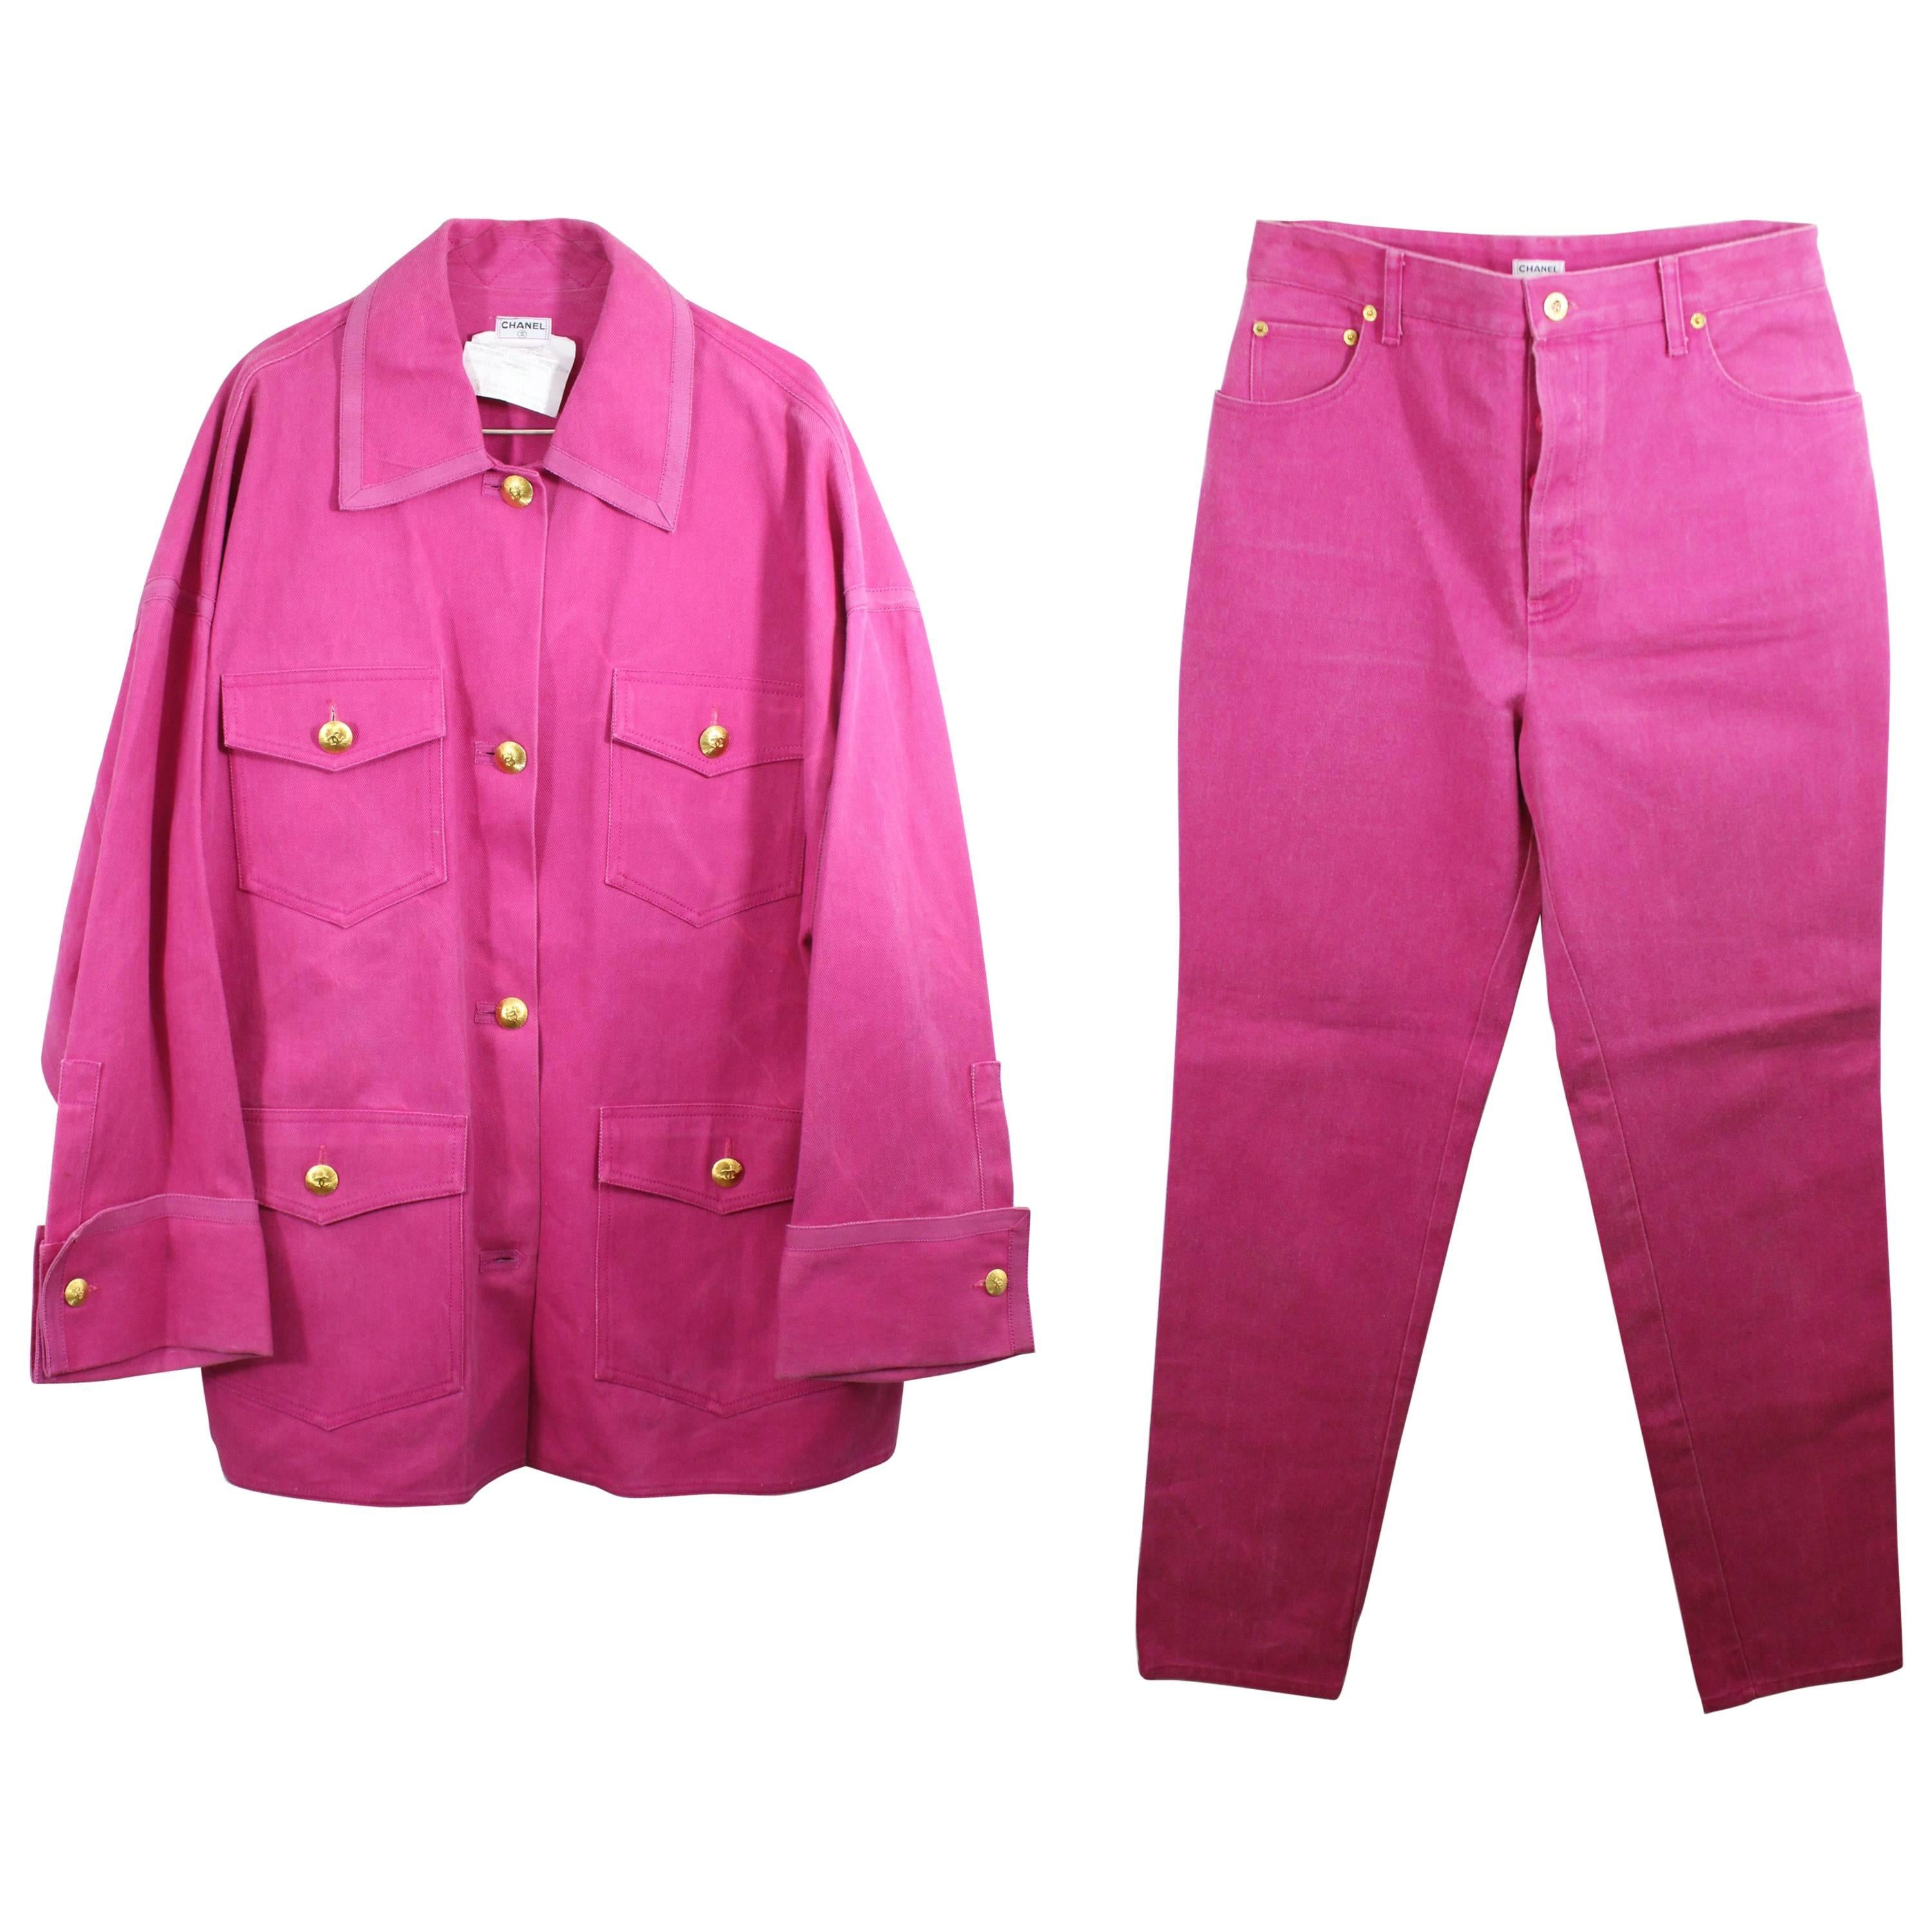 Iconic 1991  Collection Vintage Pink Jean Chanel Suit (Jacket + Trouser) 